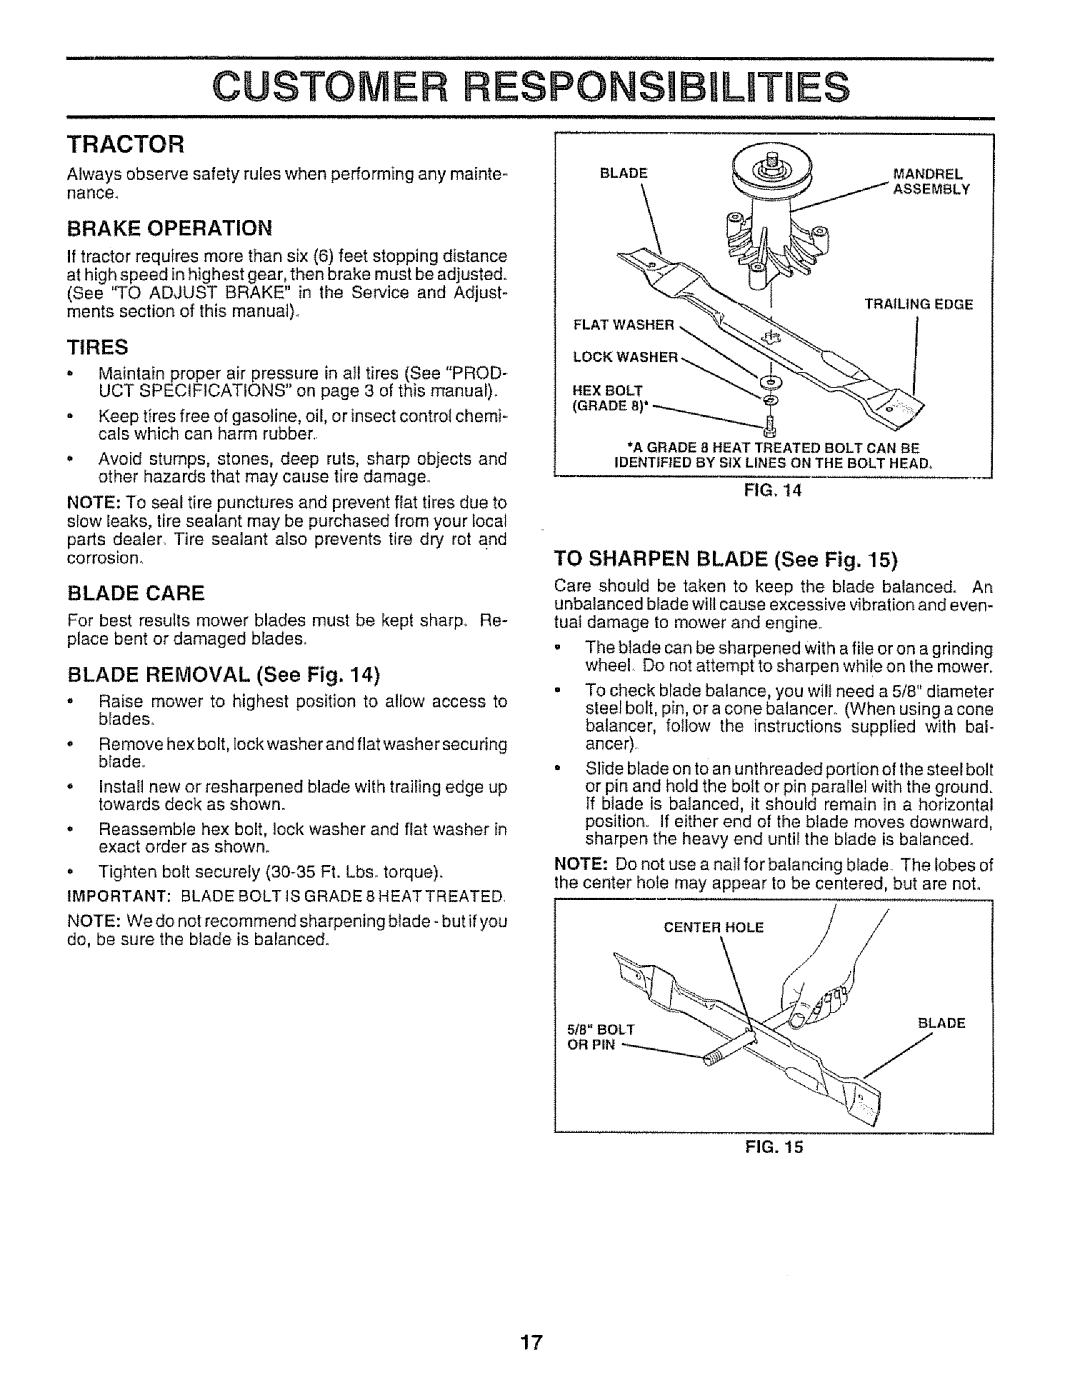 Sears 917.25953 owner manual Customer Respon, Tractor, Brake Operation, BLADE REMOVAL See Fig, TO SHARPEN BLADE See Fig 